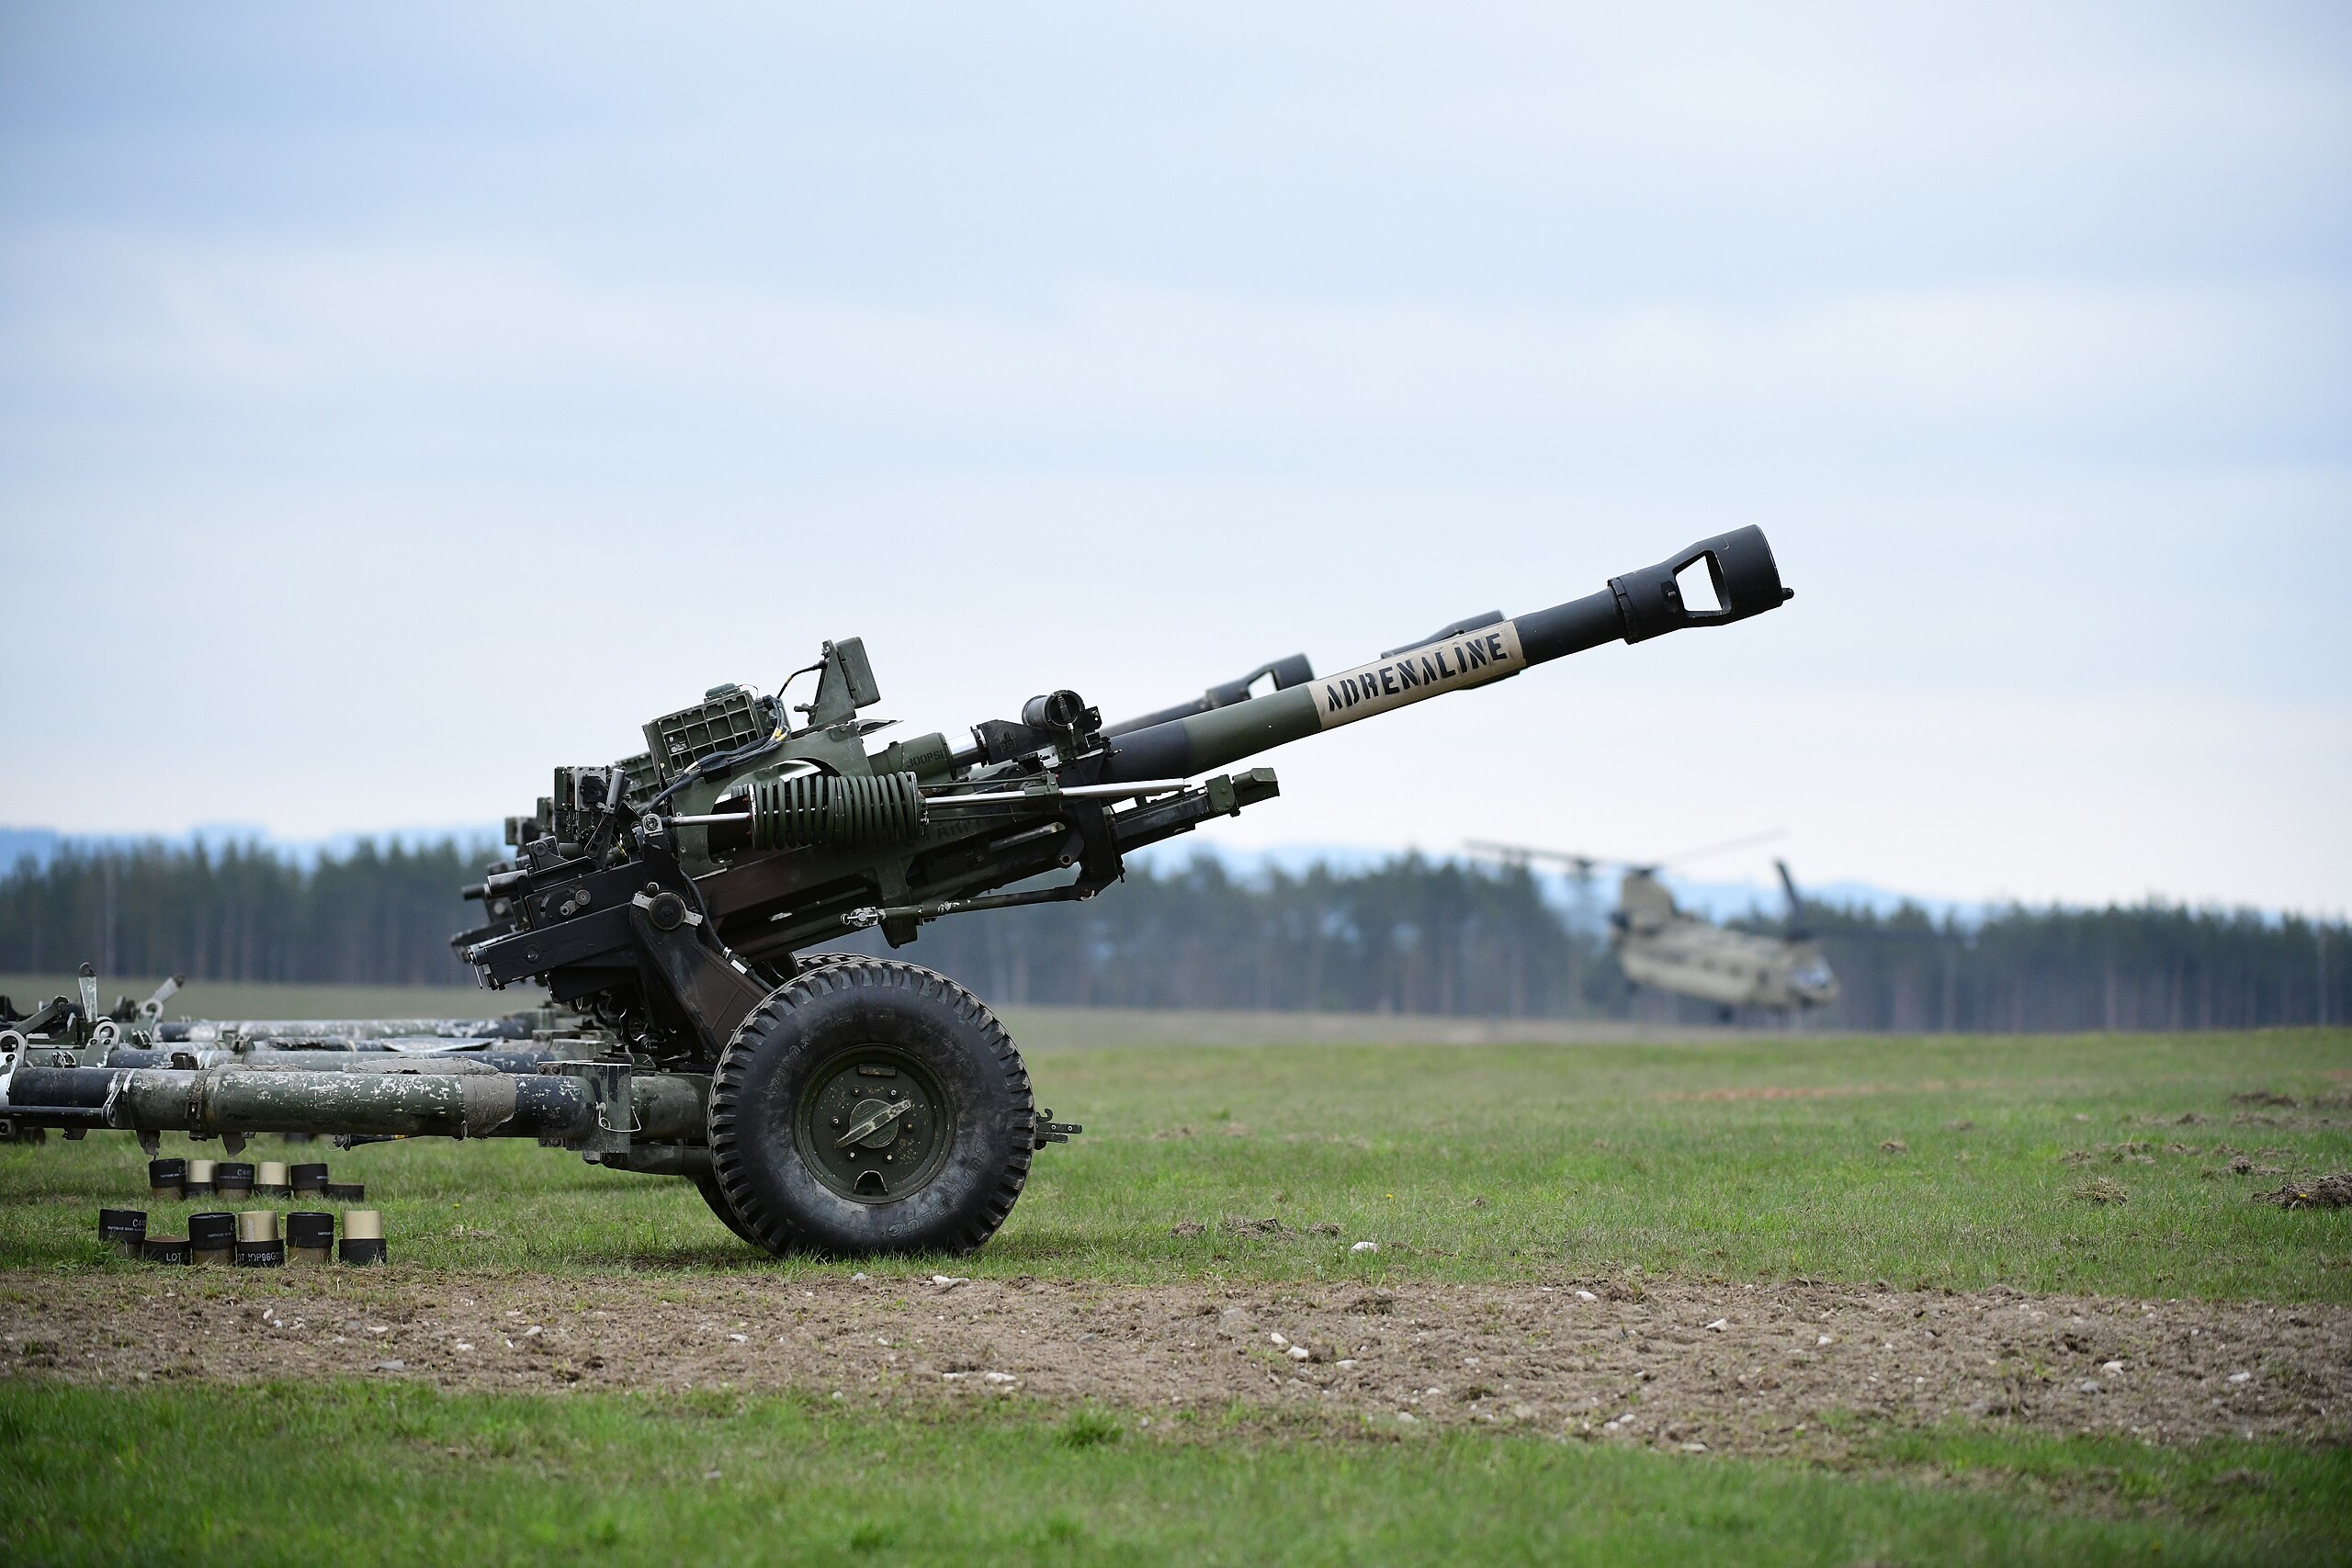 A British company will provide maintenance and repair services for L119 howitzers in Ukraine